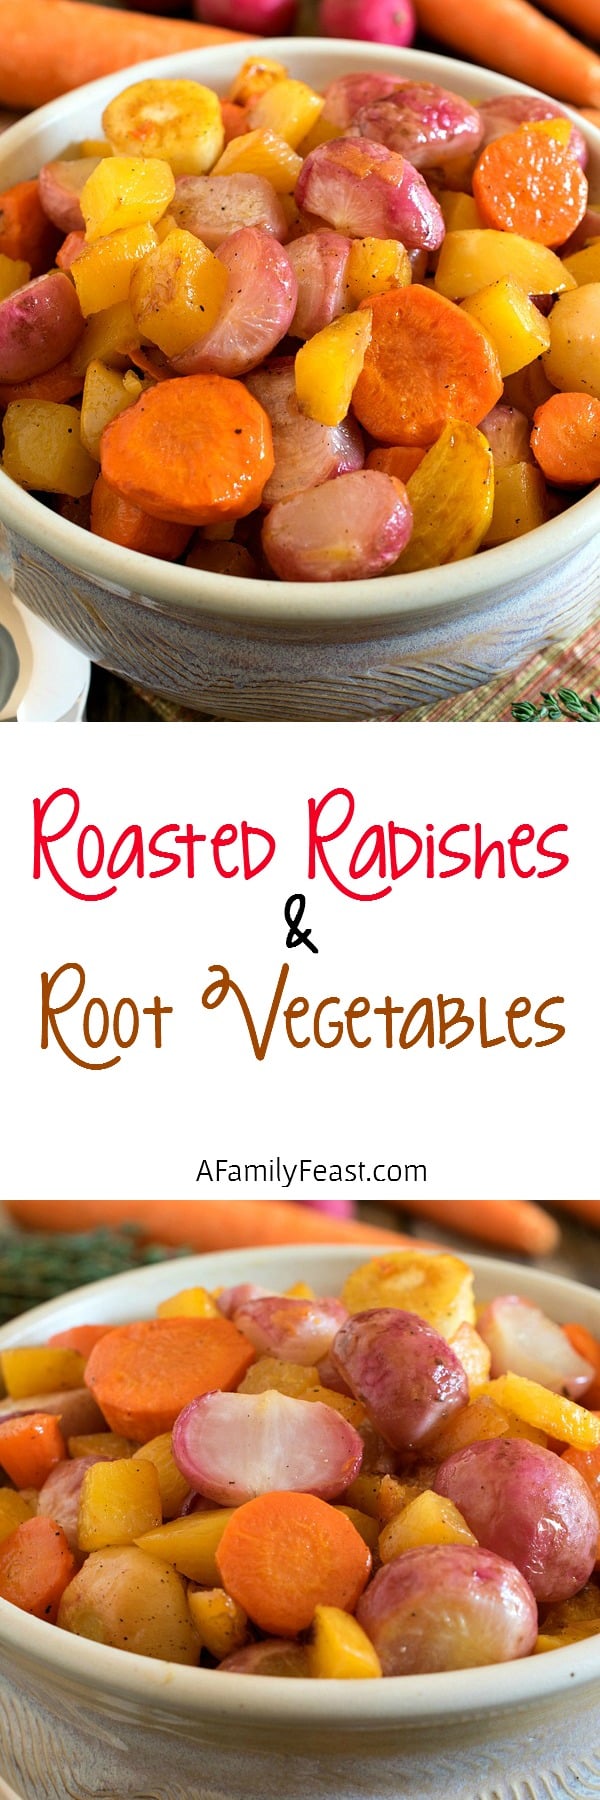 Roasted Radishes and Root Vegetables - A simple side dish with great flavor and color! (Who knew roasted radishes were so delicious!)